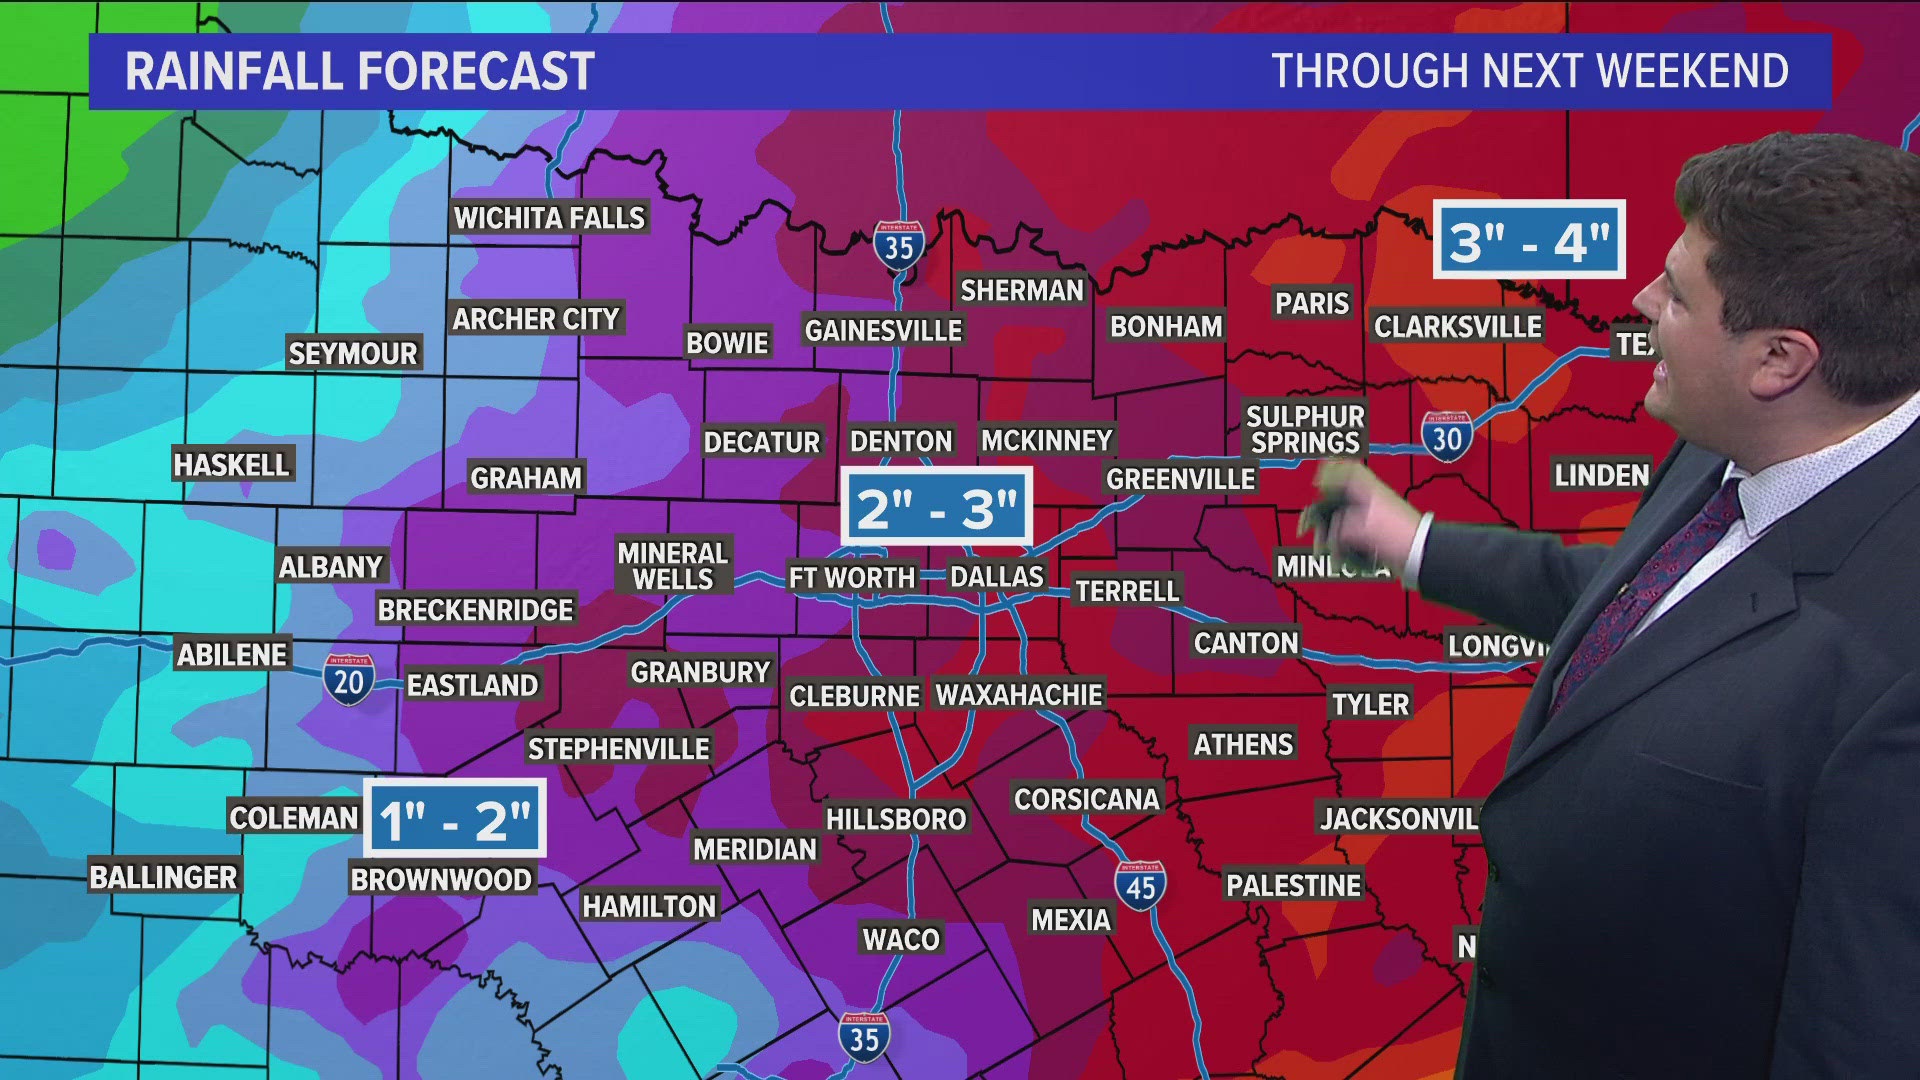 Severe weather is also possible for parts of North Texas later this week.